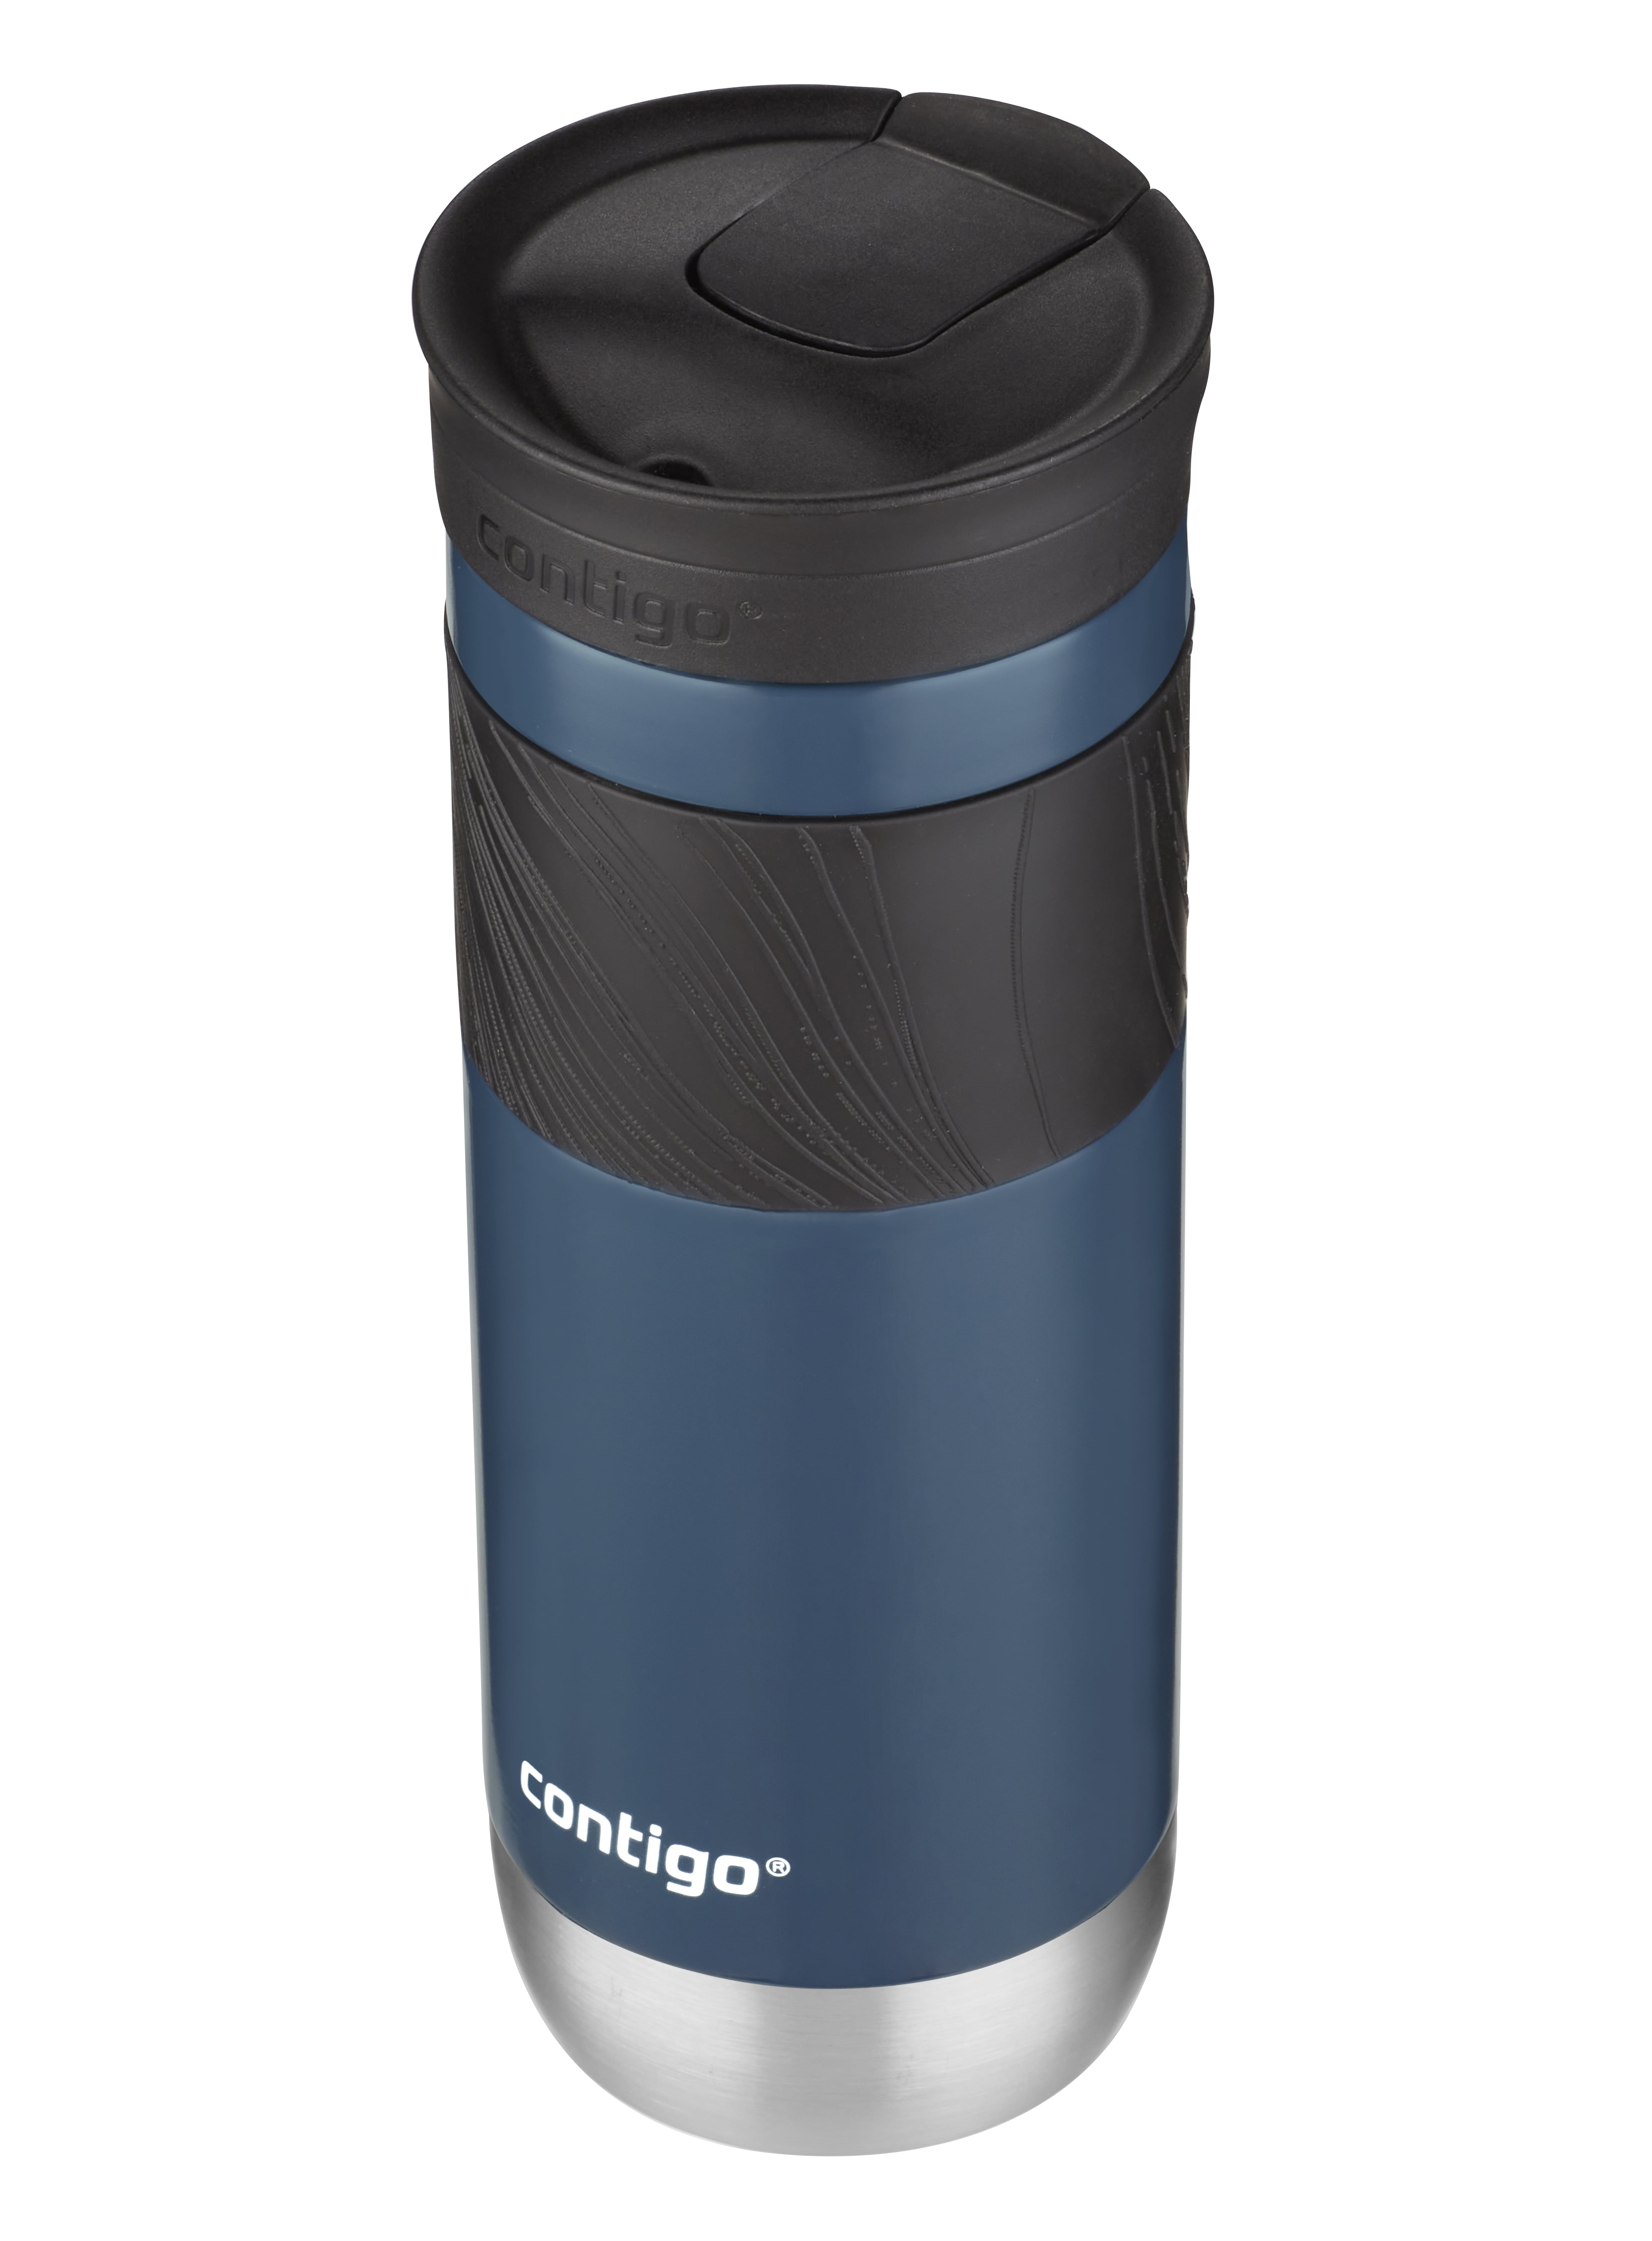  Contigo Byron Vacuum-Insulated Stainless Steel Travel Mug with  Leak-Proof Lid, Reusable Coffee Cup or Water Bottle, BPA-Free, Keeps Drinks  Hot or Cold for Hours, 16oz 2-Pack, Blueberry & Gold Morel 